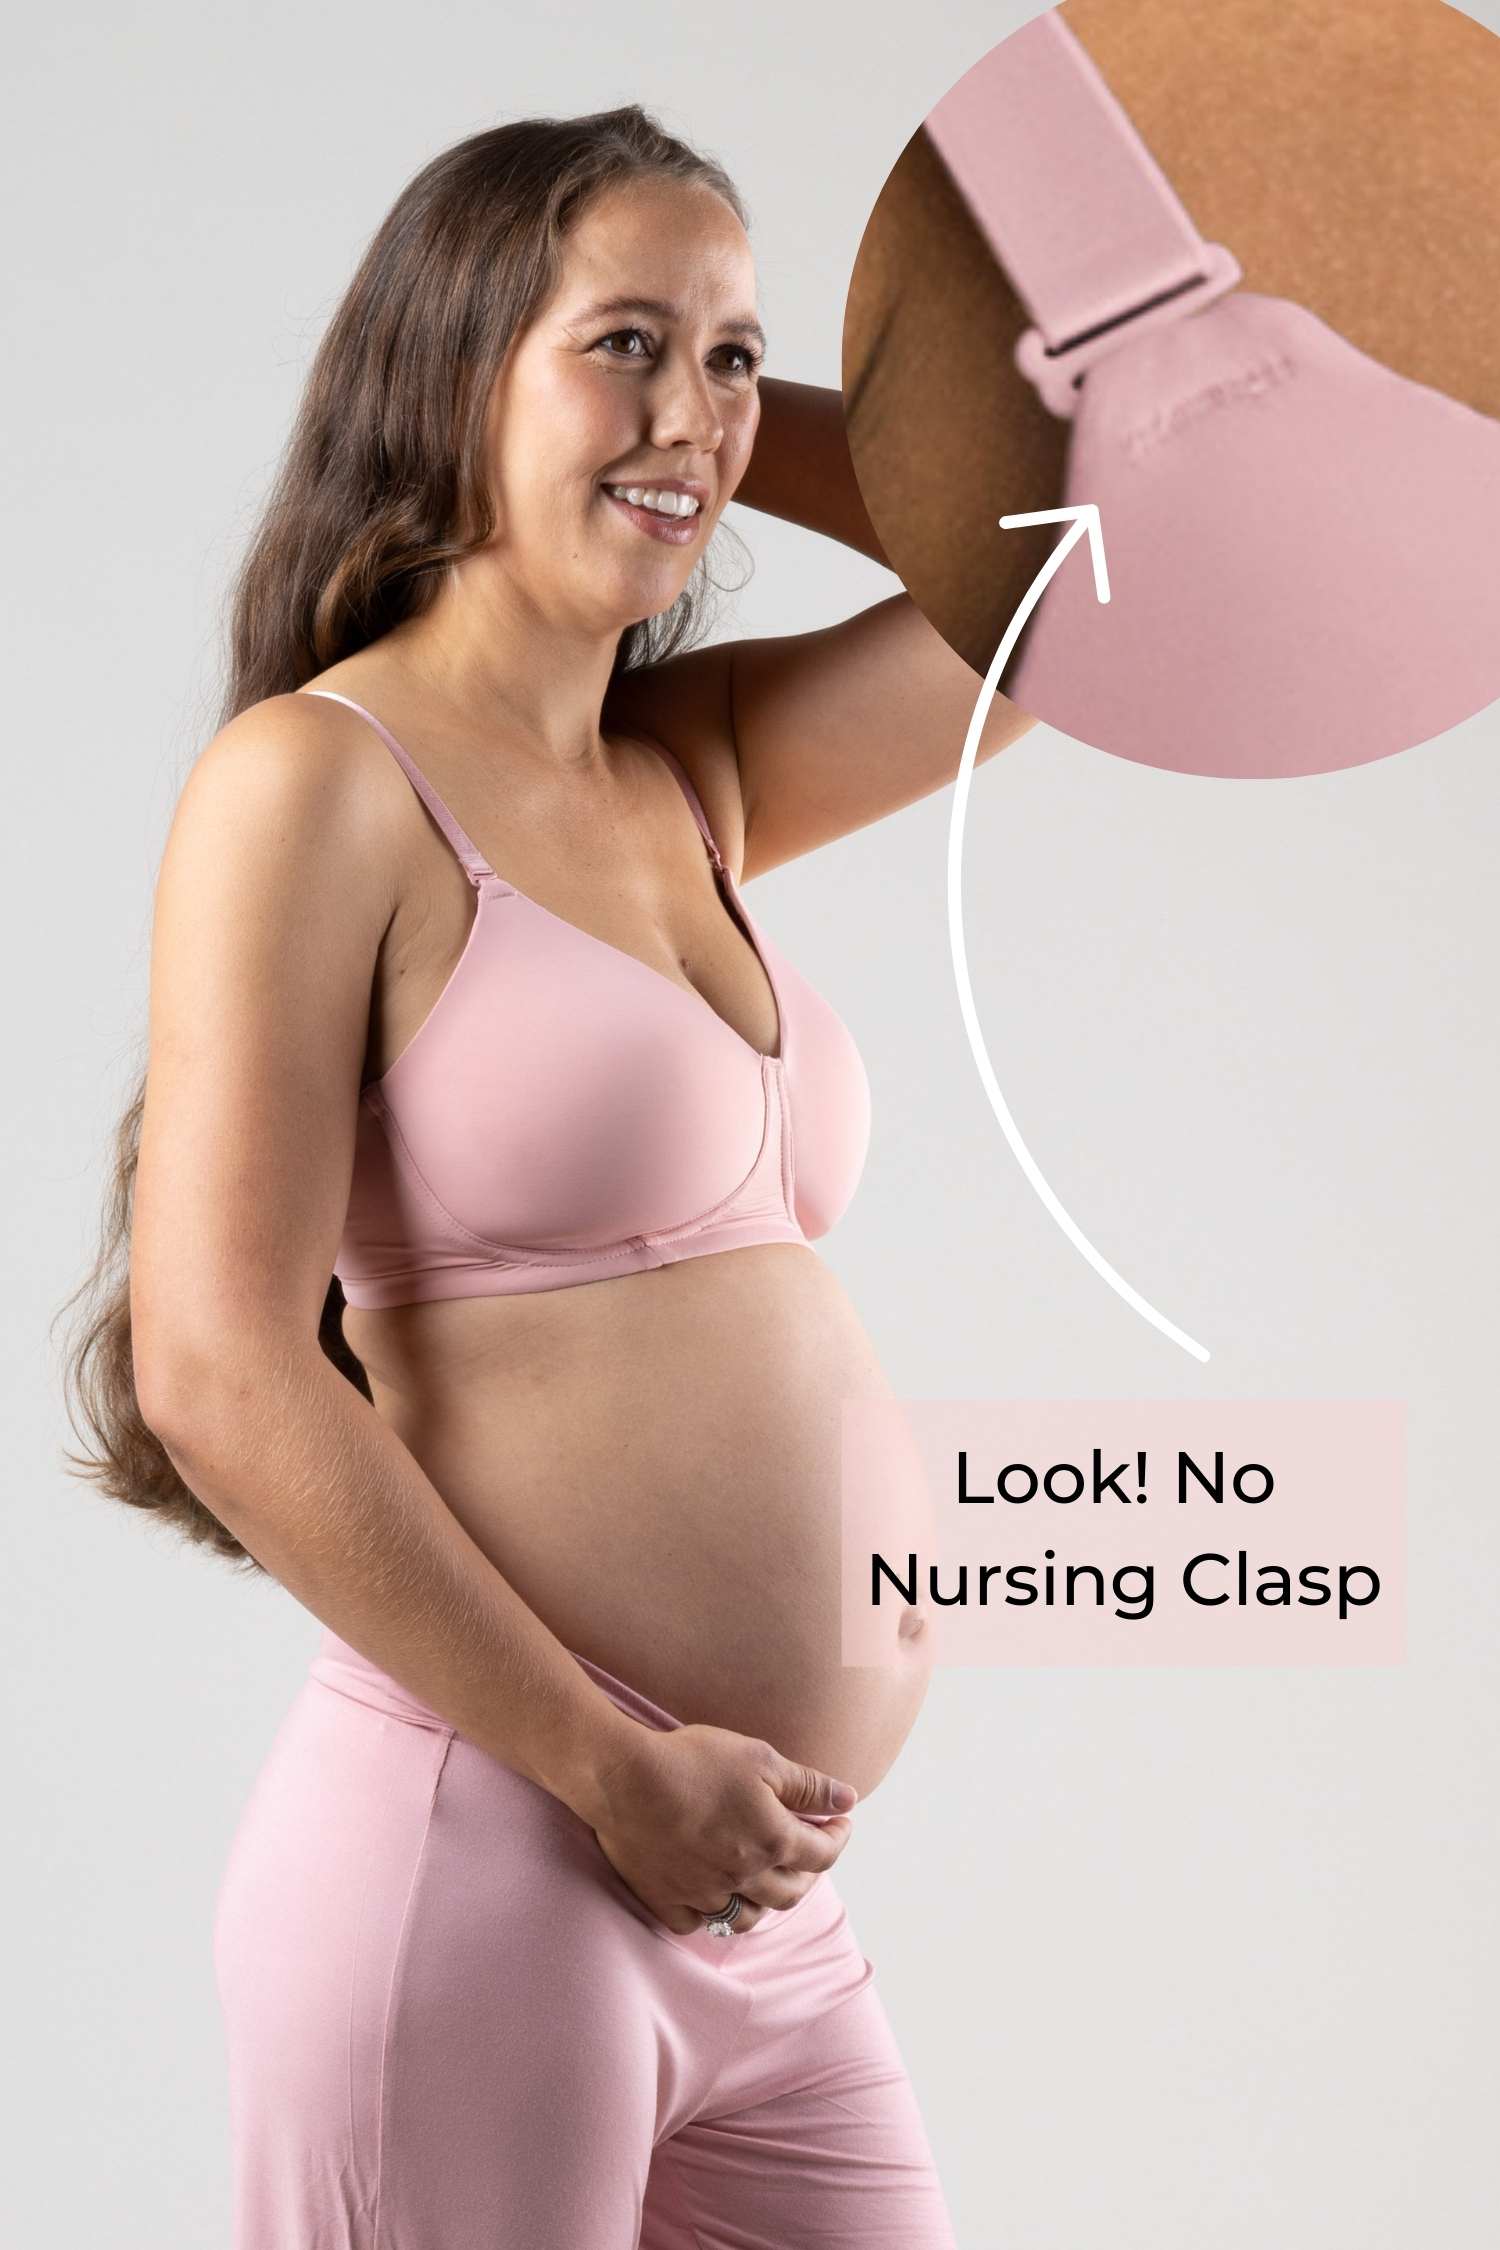 Undercover Nursing T-Shirt Bra in Rose Pink on Pregnant Brunette Model showing feature where plastic nursing clasp is hidden. Arrow points from inset of detail shot of apex of bra cup showing no visible nursing clasp.